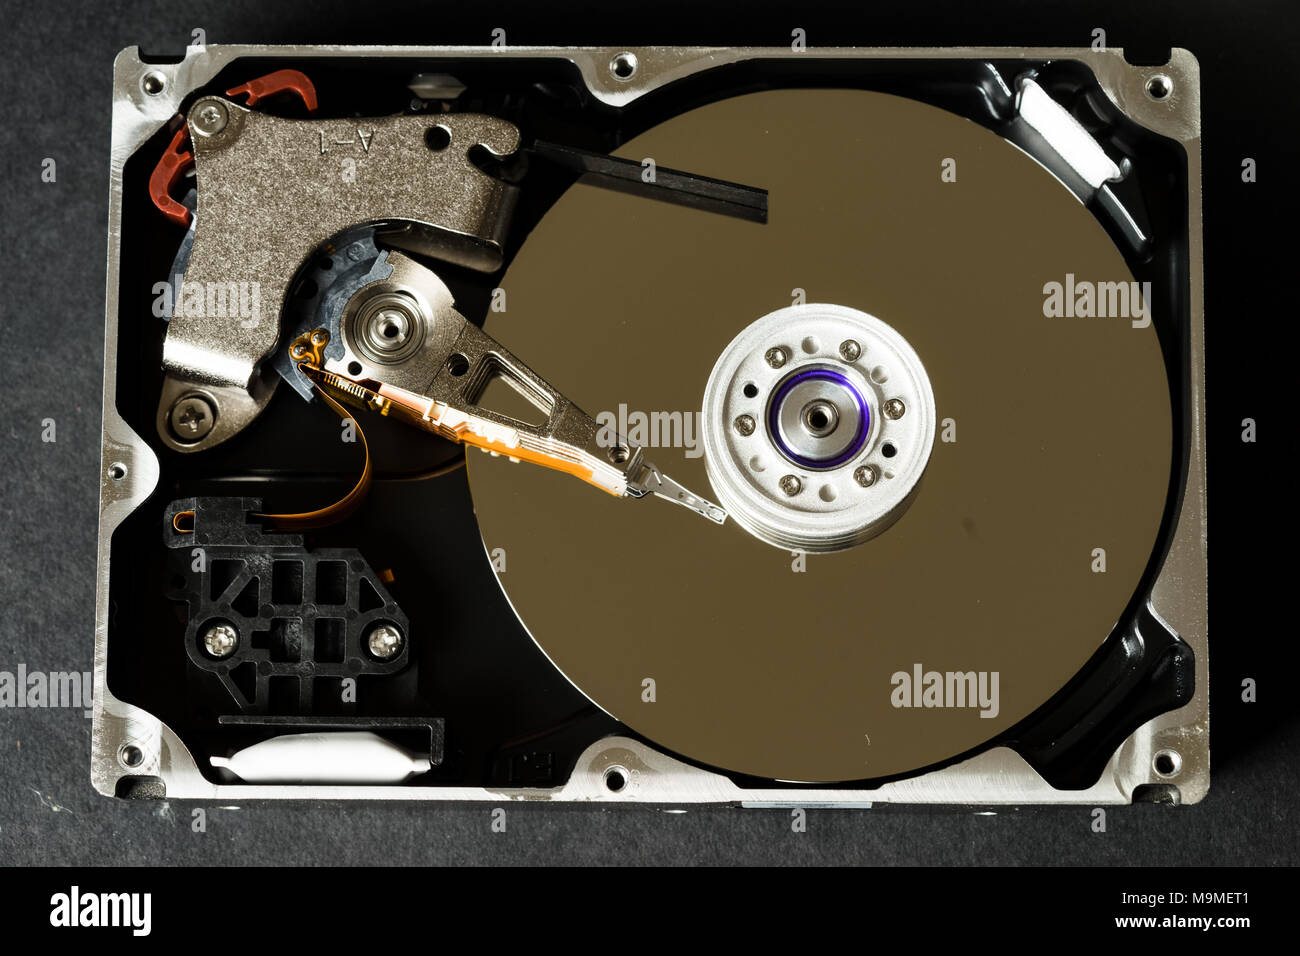 Hard disk drive with removed cover, hdd inside flat view, spindle, actuator arm, read write head, platter, ribbon cable. Stock Photo